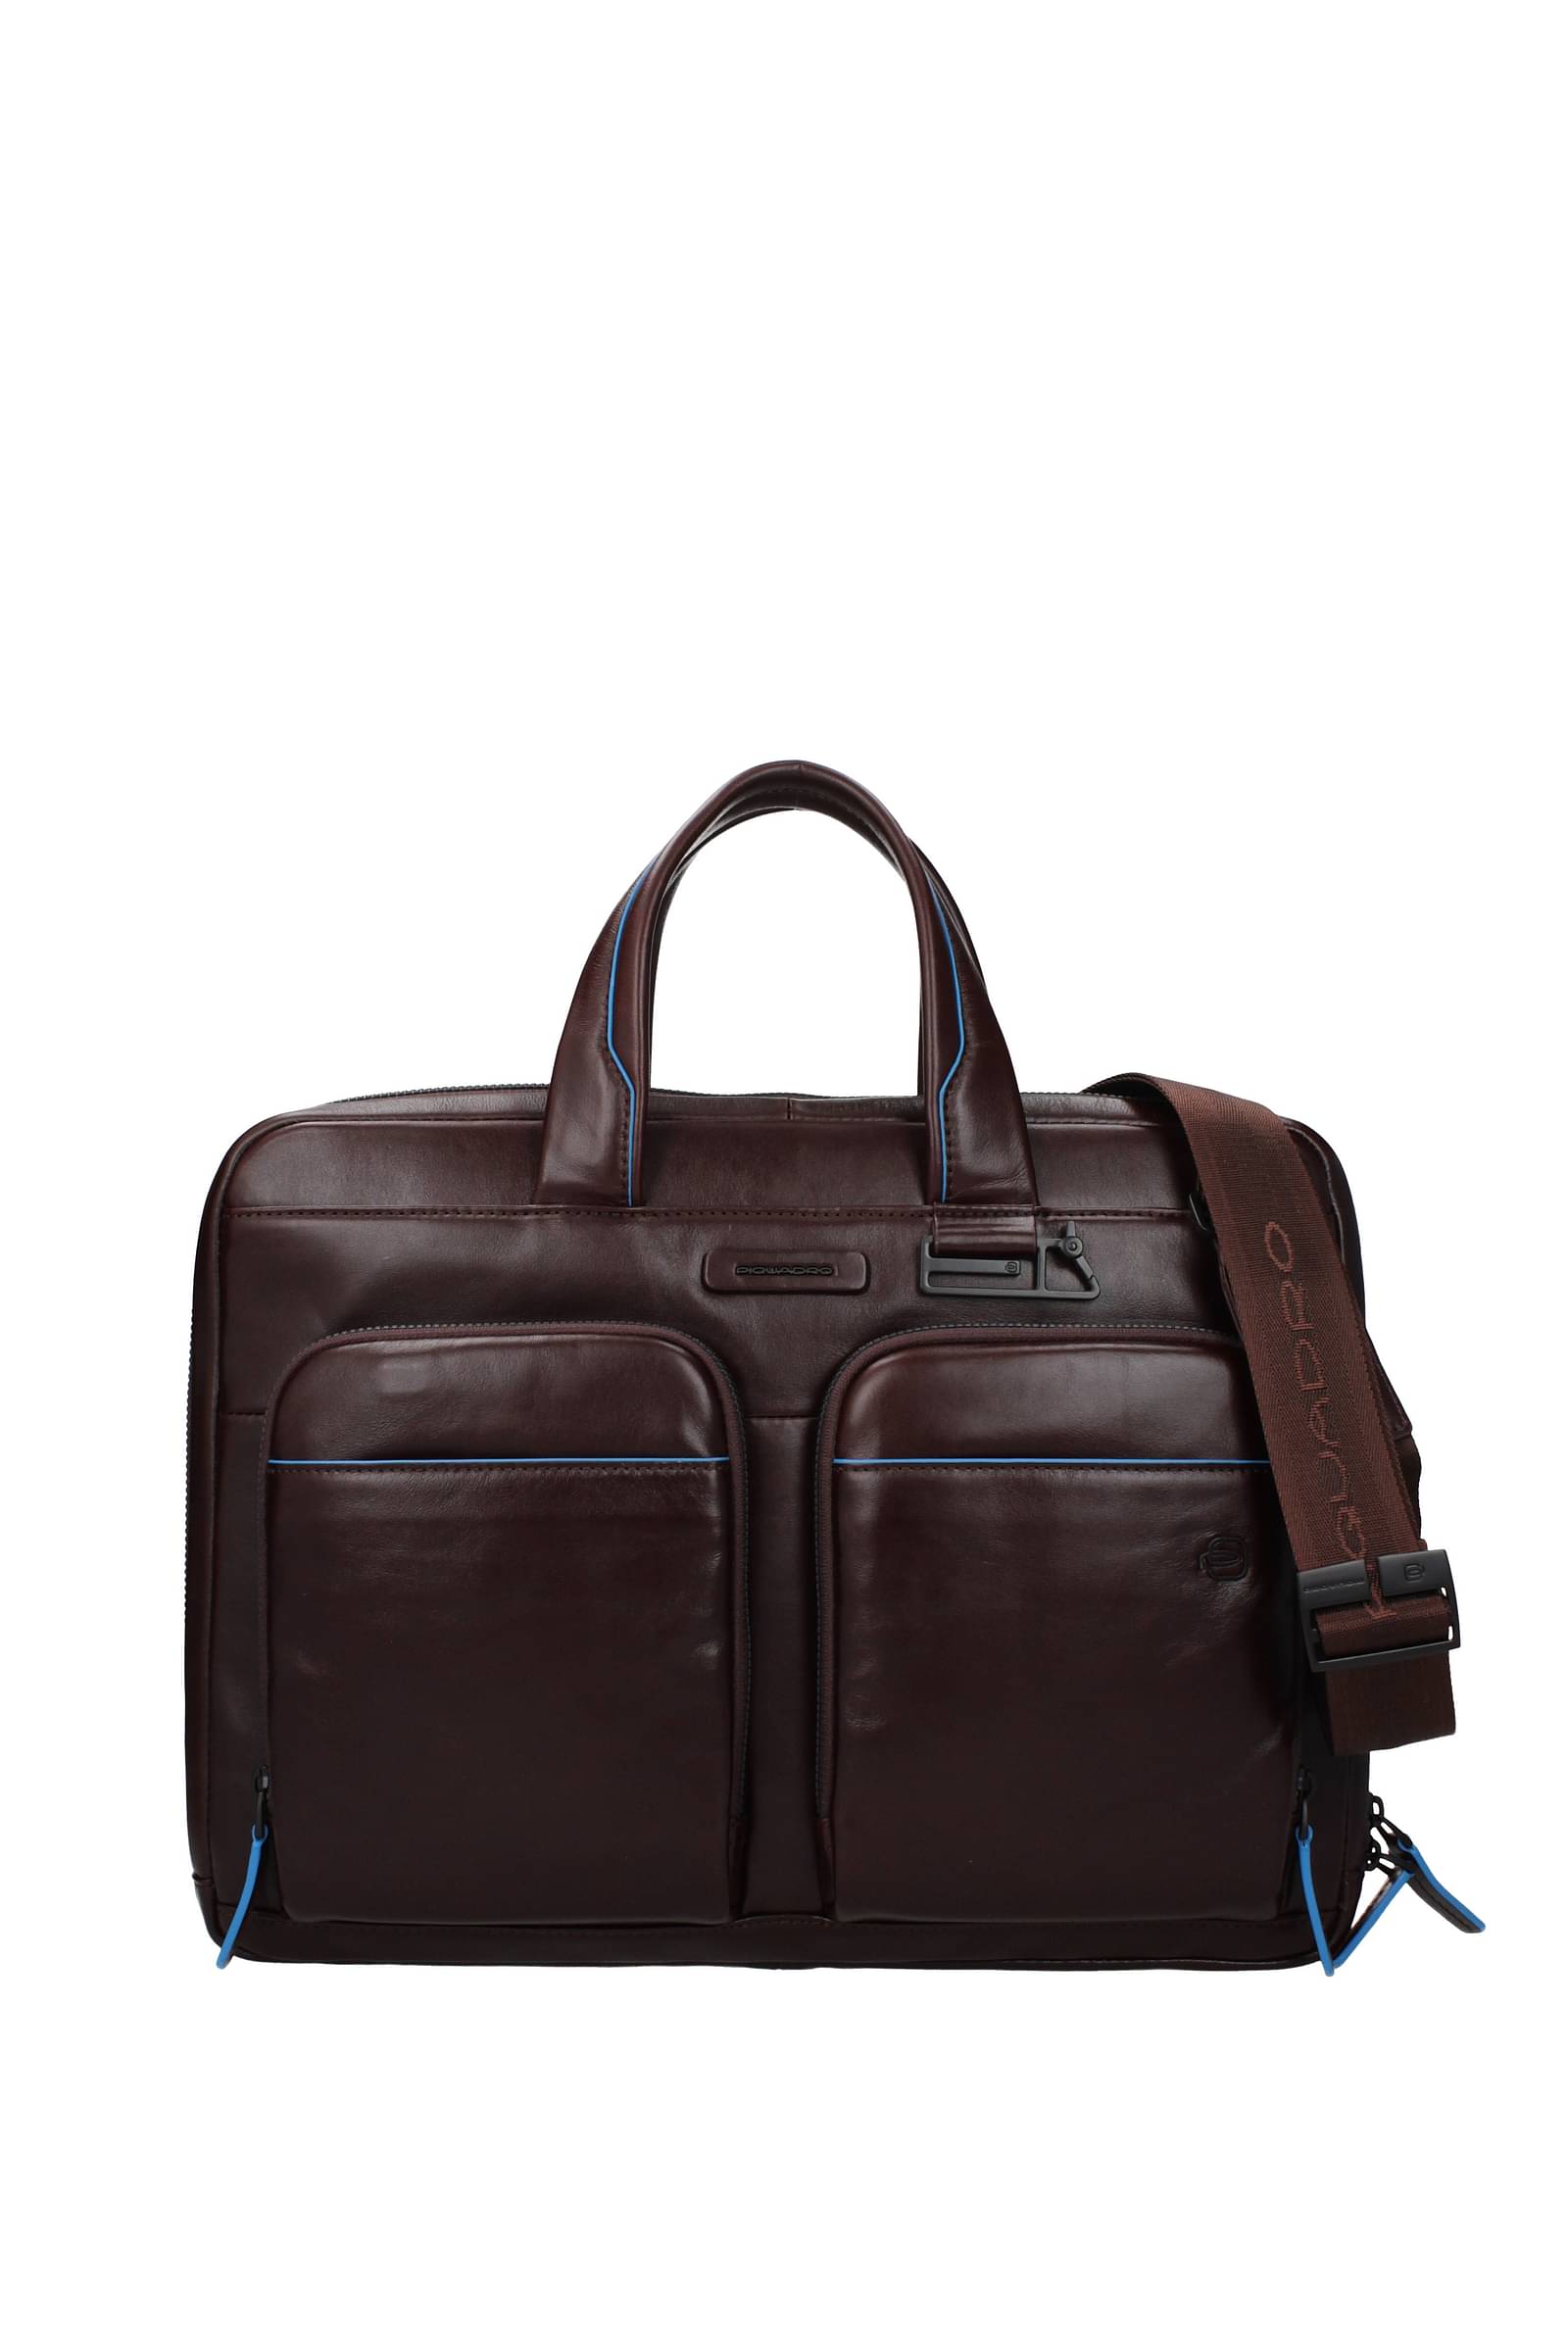 Want an Unboring Work Bag? Our Best Picks for Men - WSJ